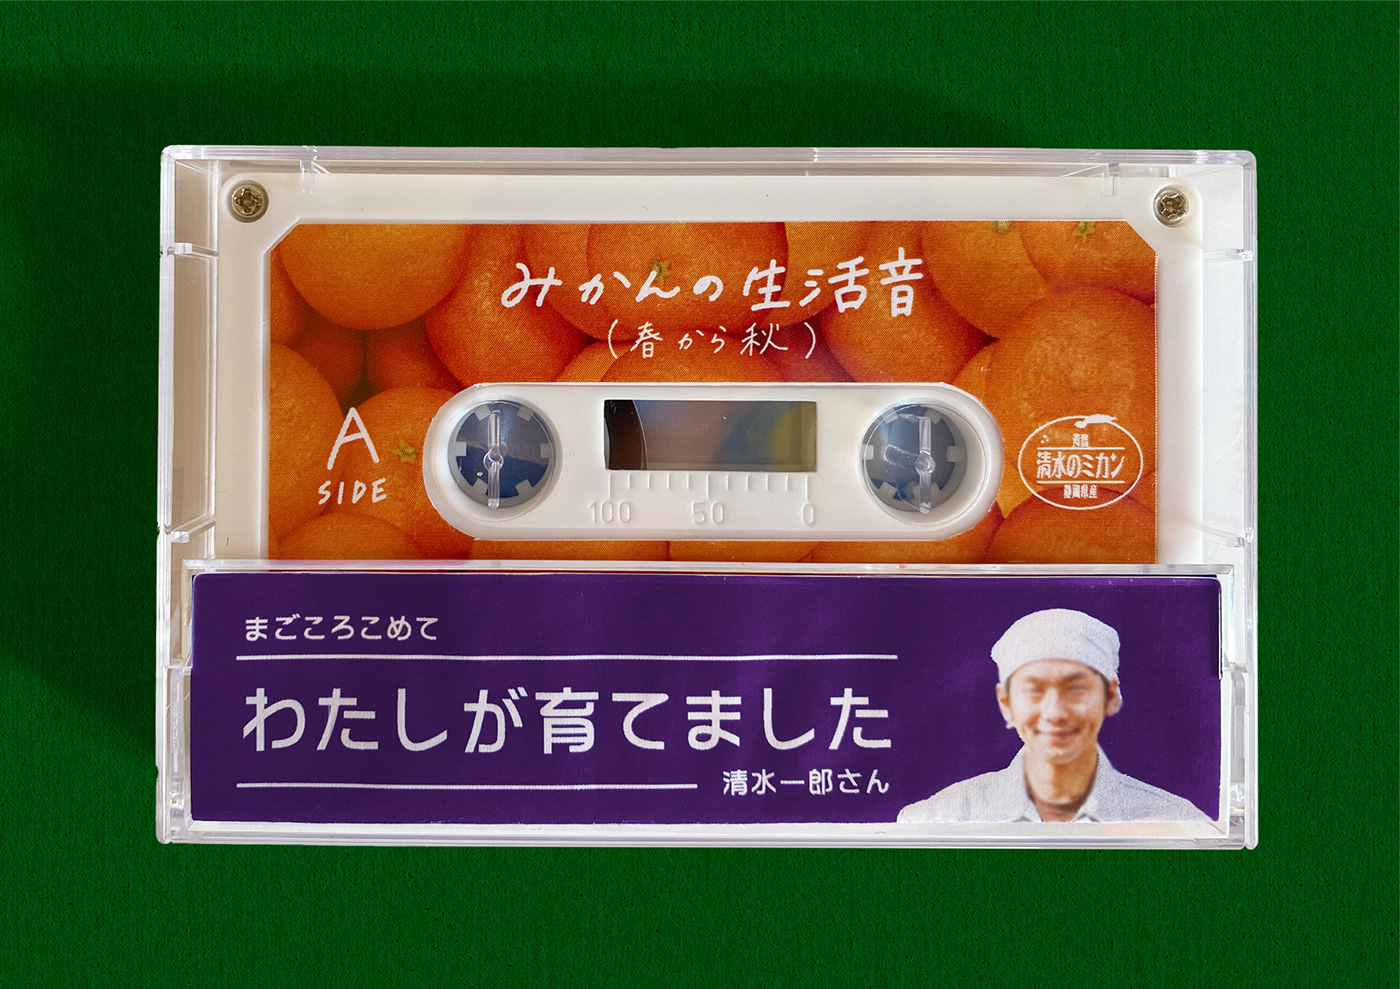 cassette farm Food  Fruit japan package Packaging graphic graphic design  バンタンデザイン学部2020年生